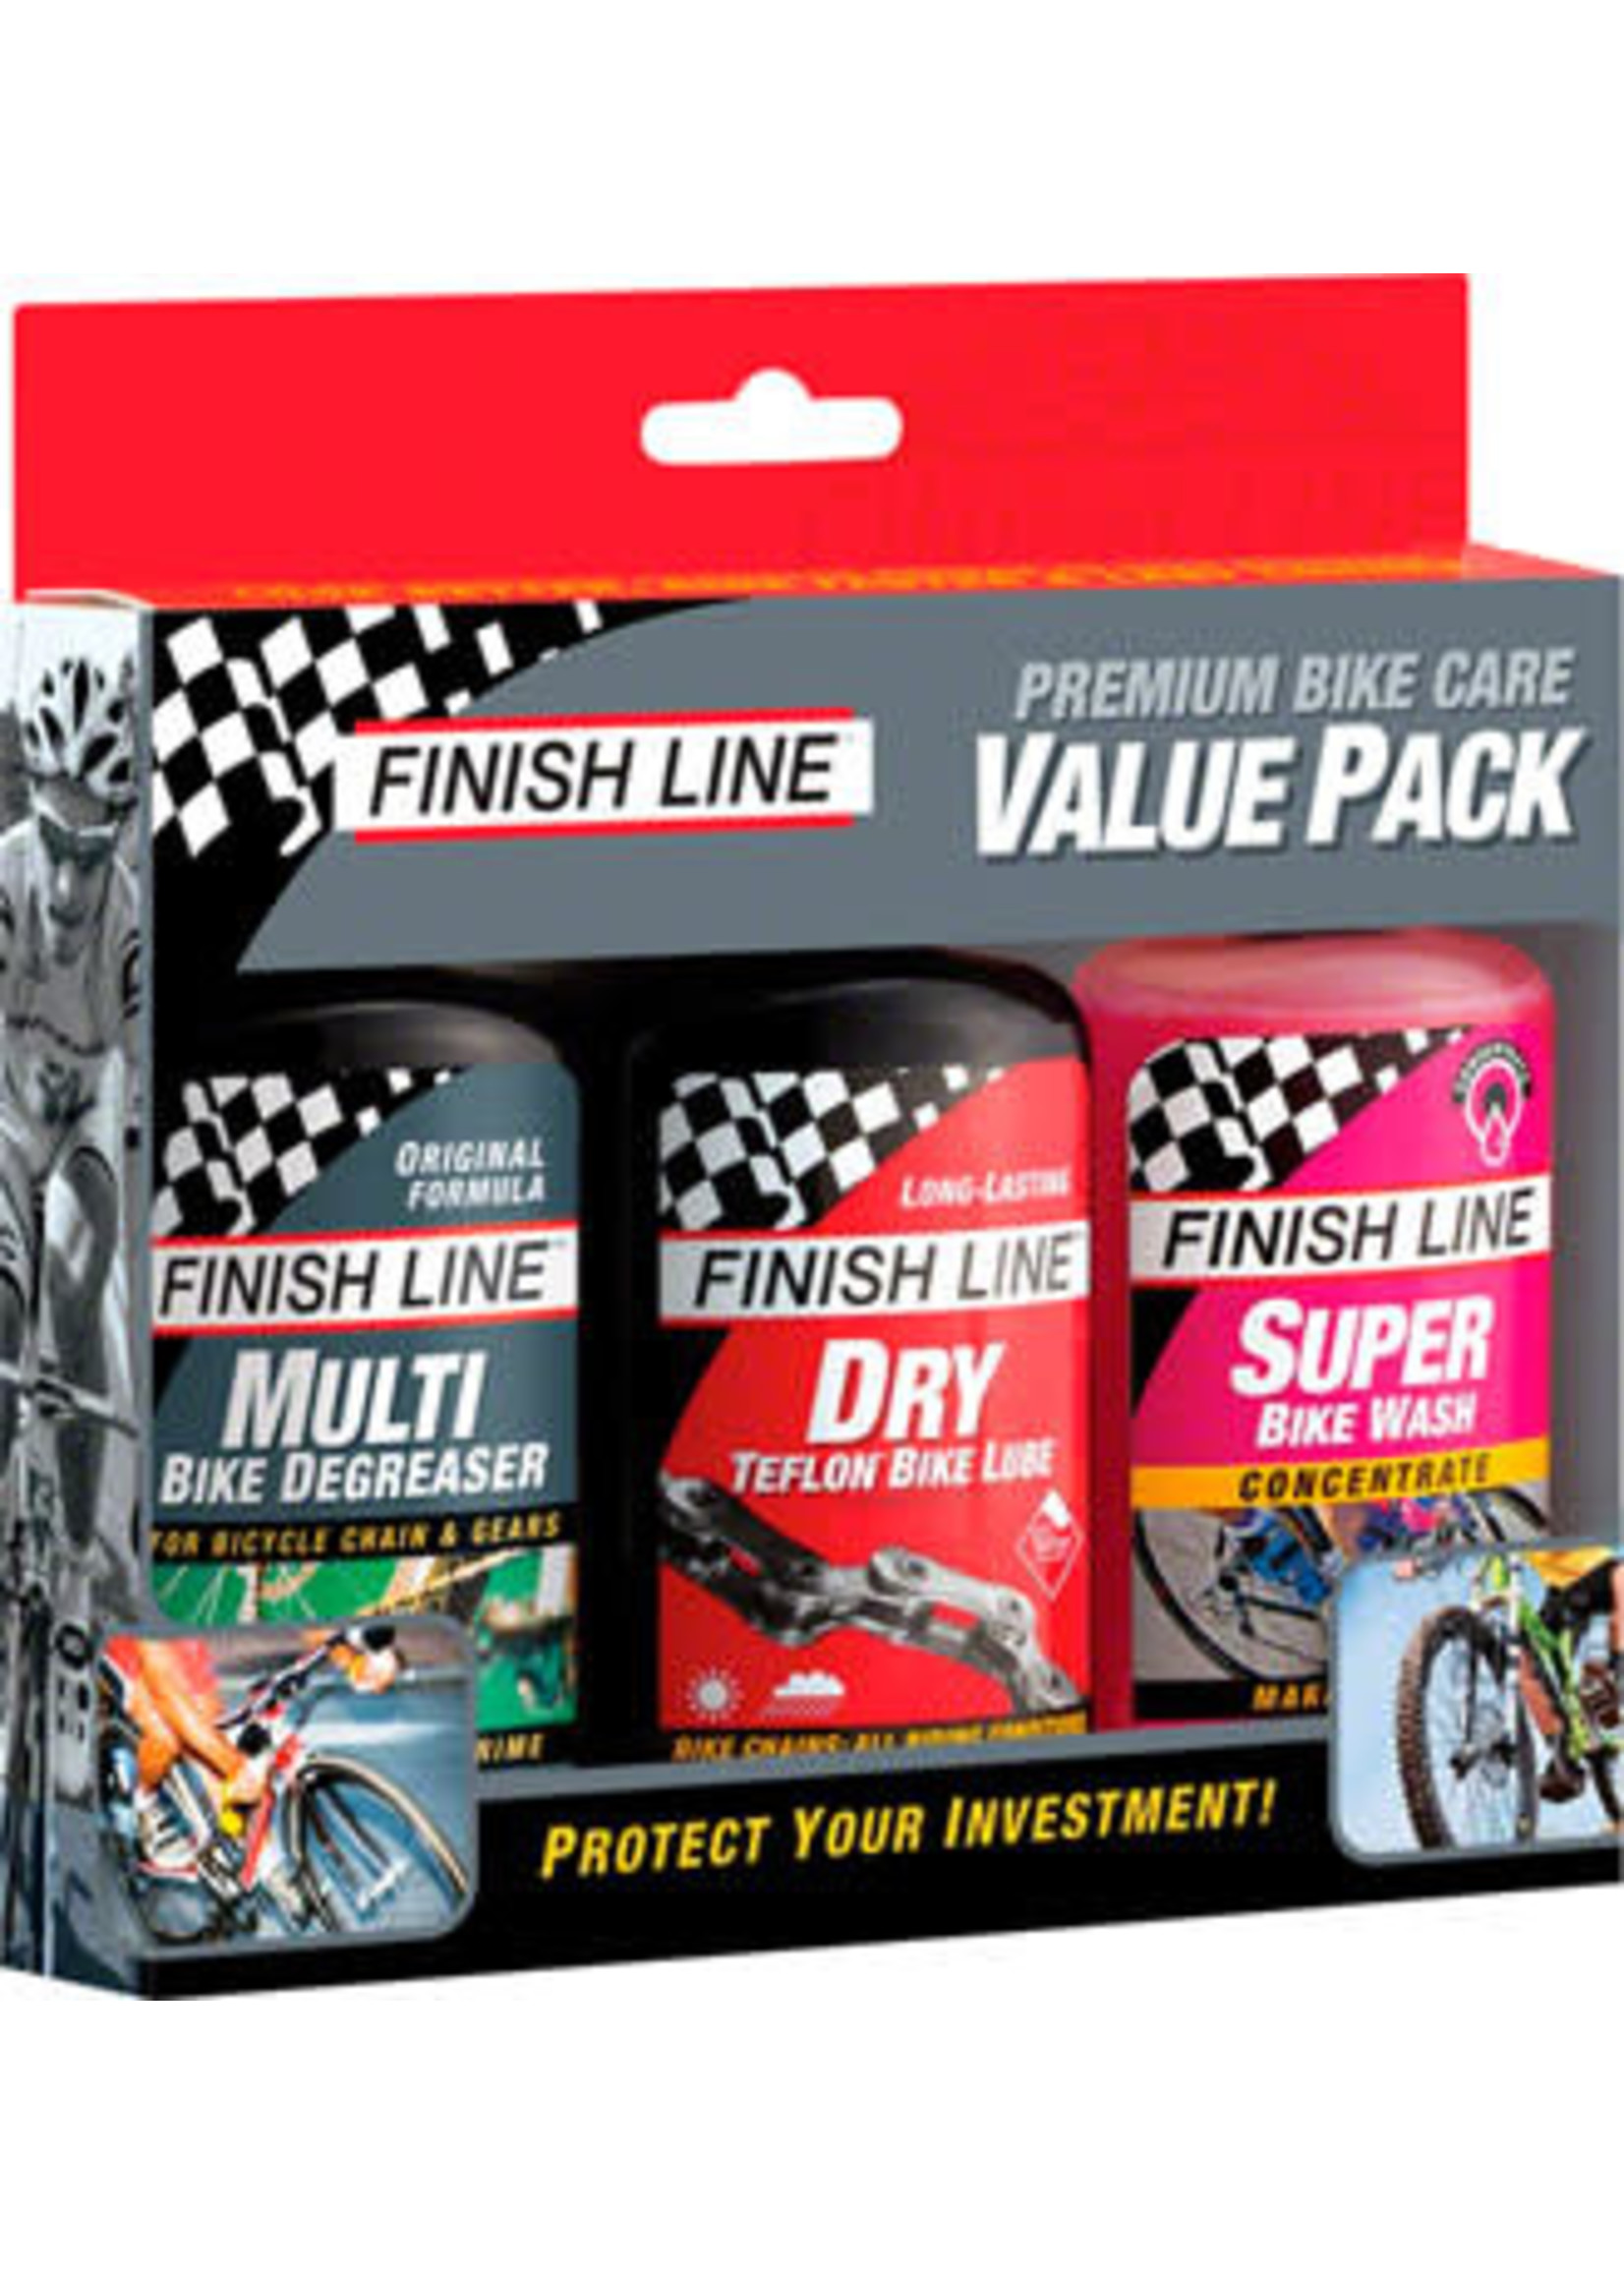 Finish Line Finish Line Bike Care Value Pack, Includes DRY Chain Lubricant, EcoTech Degreaser and Super Bike Wash Cleaner